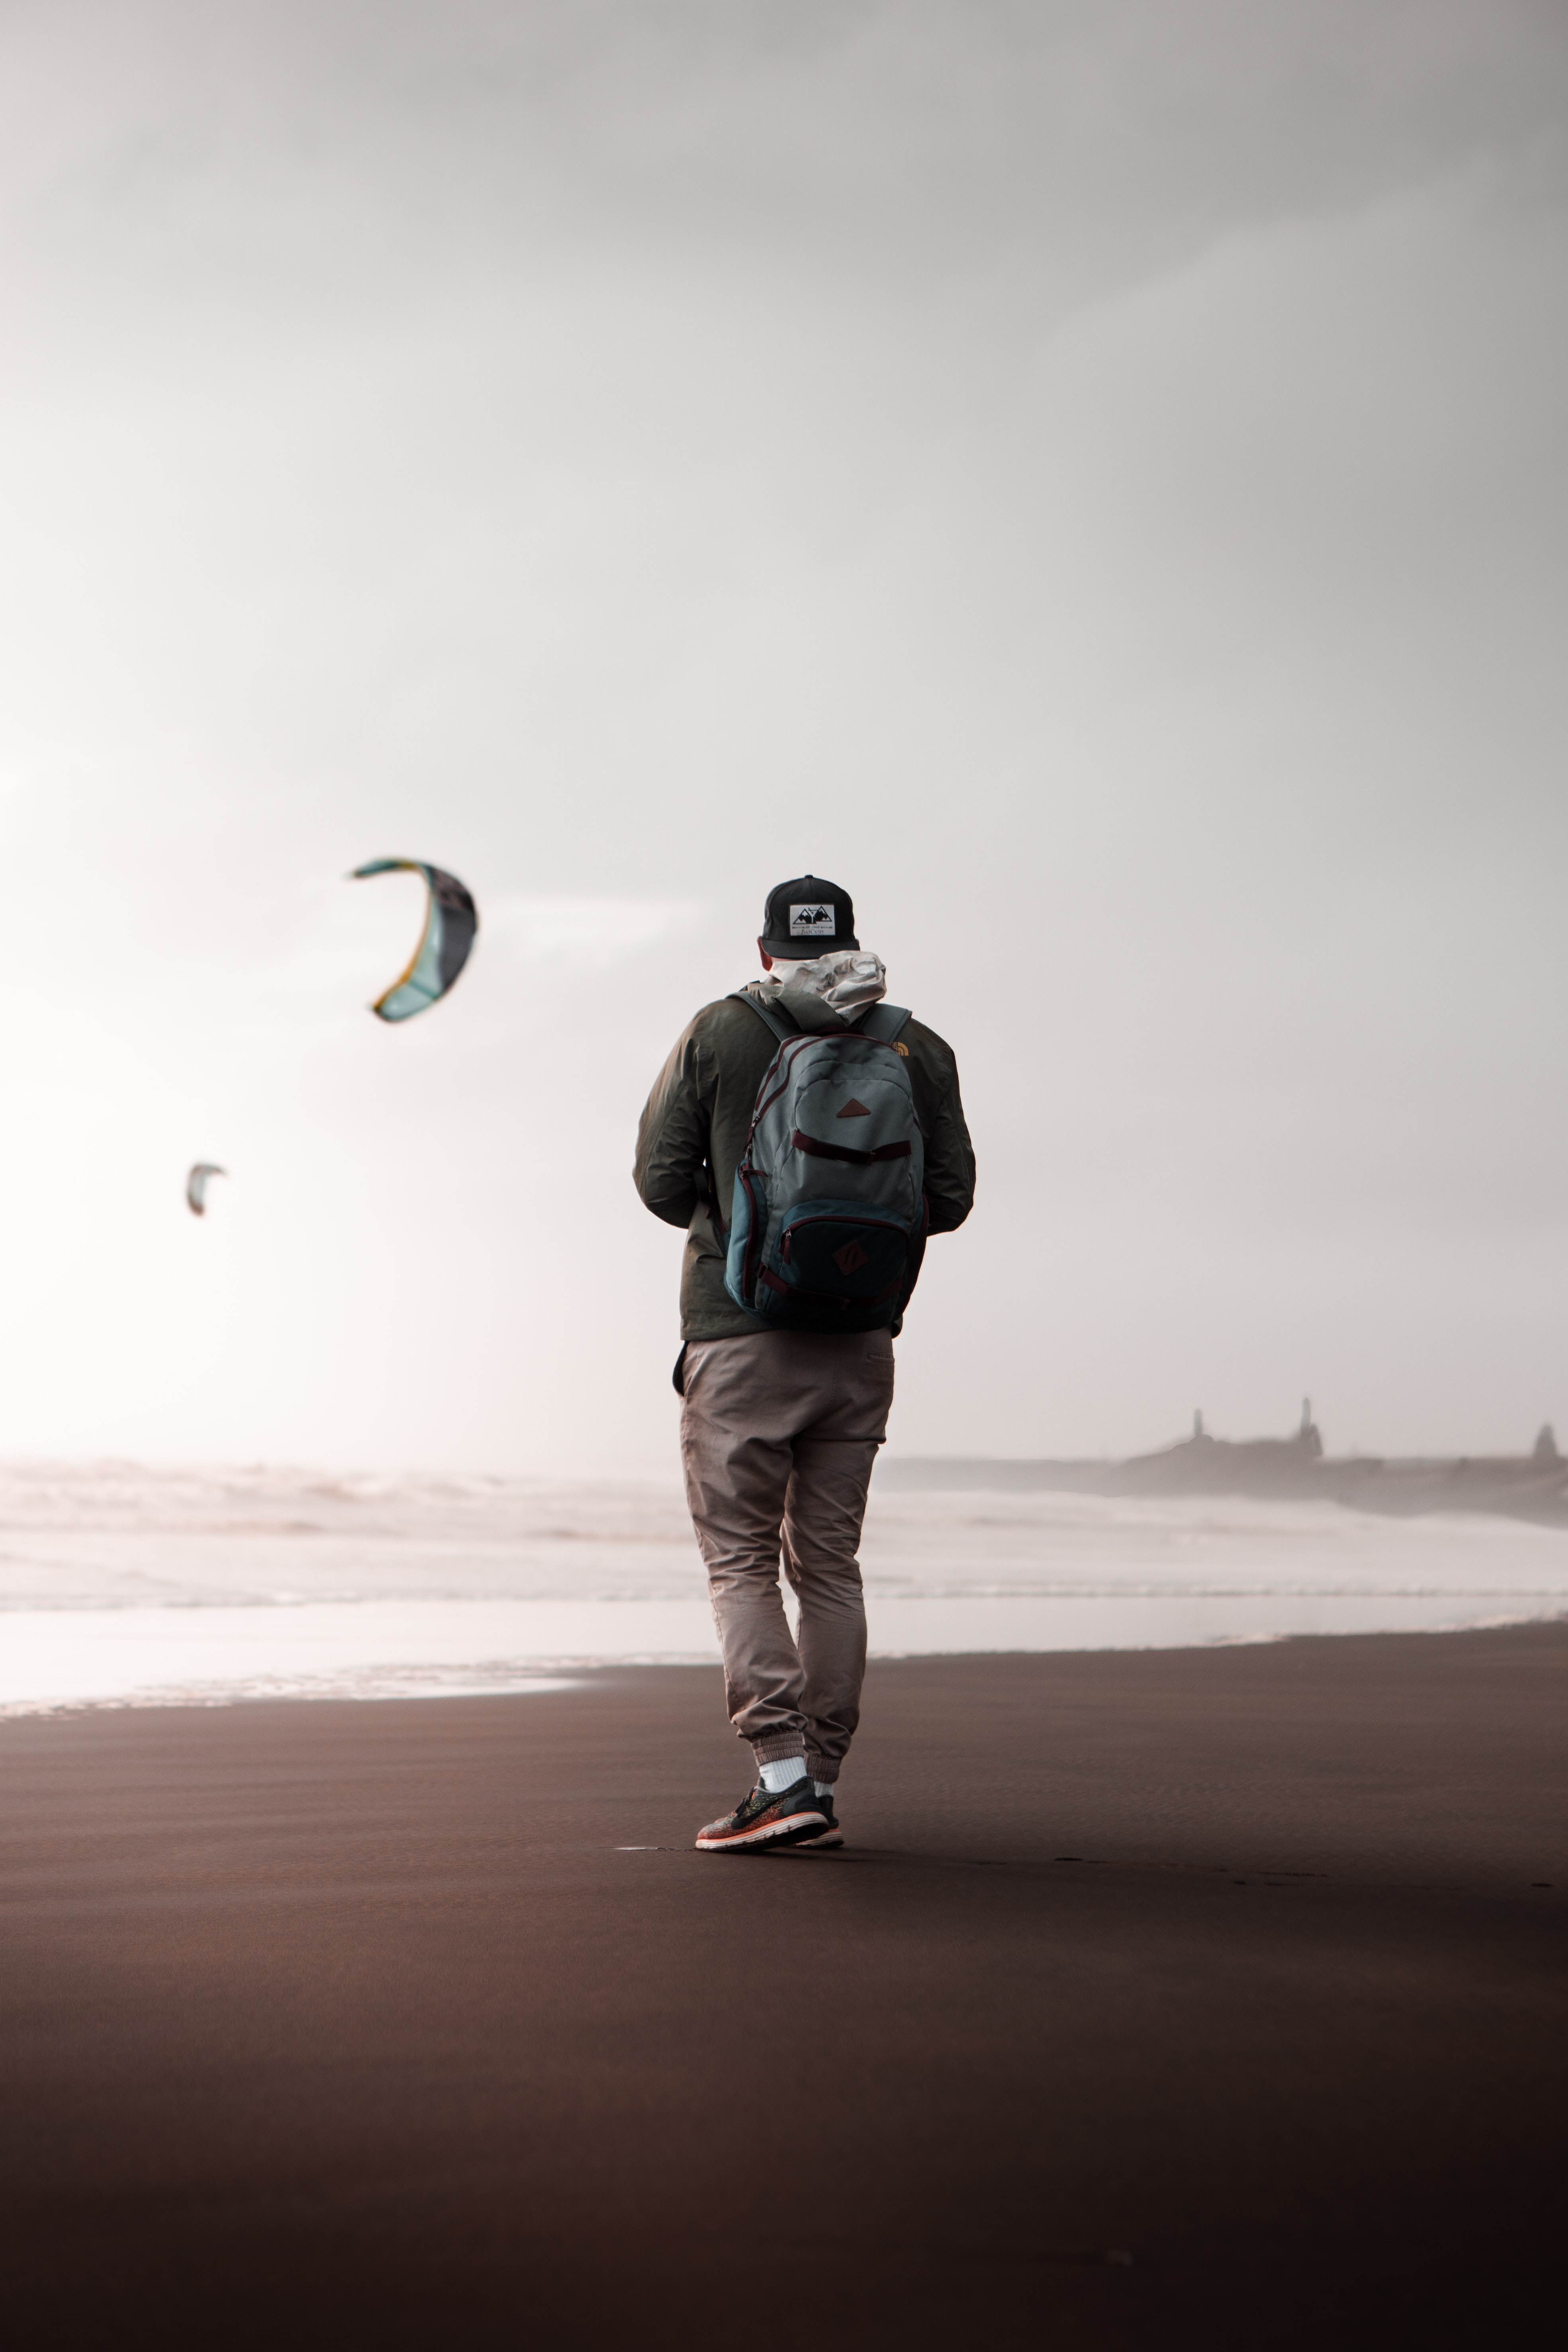 miscellanea, alone, lonely, coast, miscellaneous, style, human, person, loneliness, paragliders